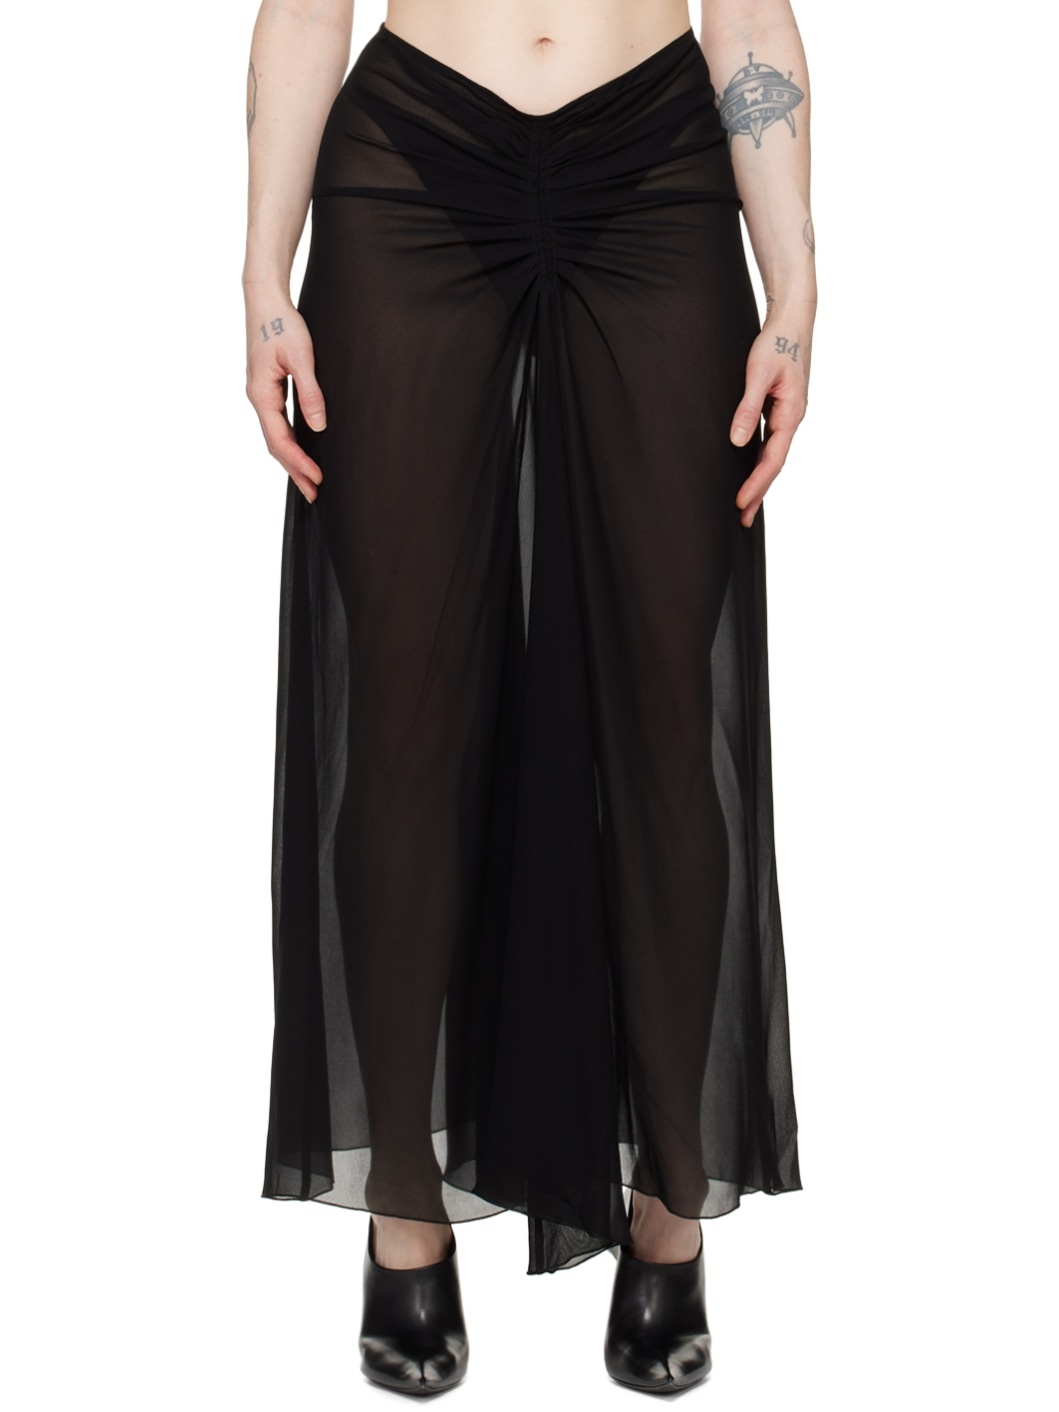 Black Ruched Maxi Skirt - 1